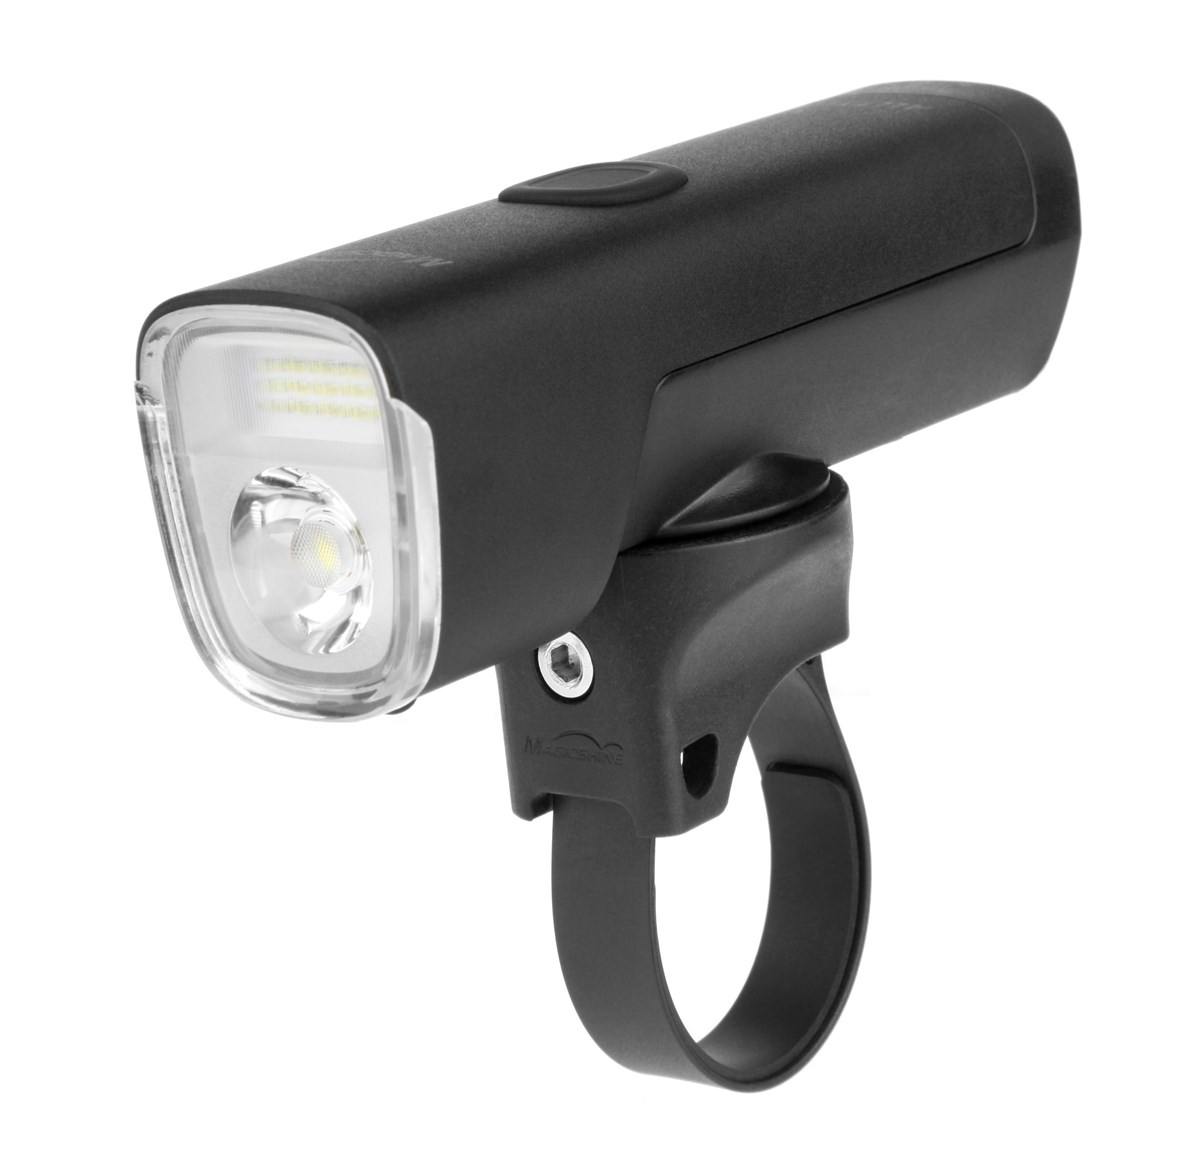 Magicshine Allty 1500 Front Light product image